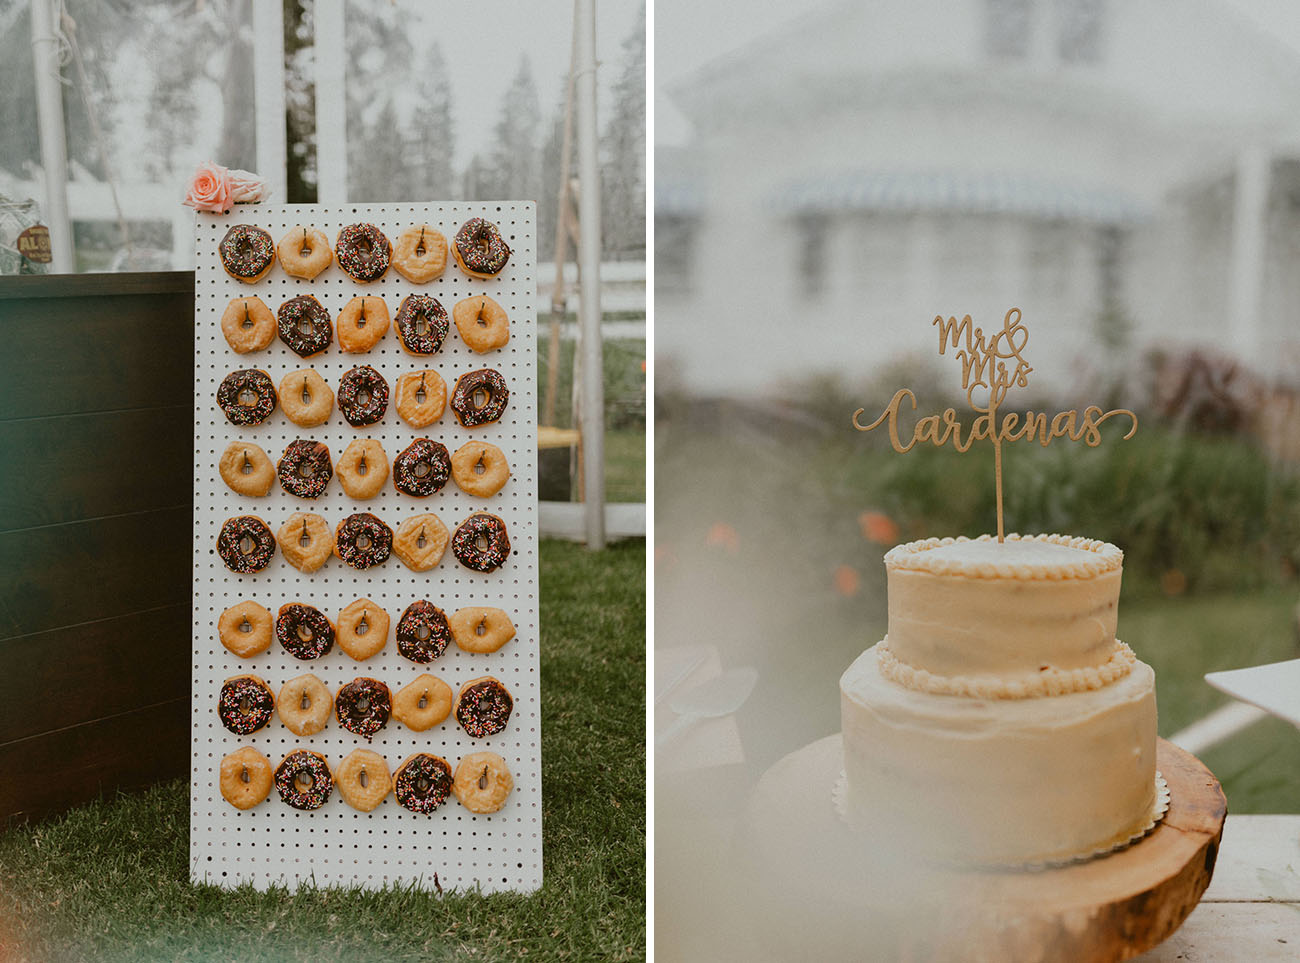 The wedding cake was a naked one, and there was a trendy donut wall